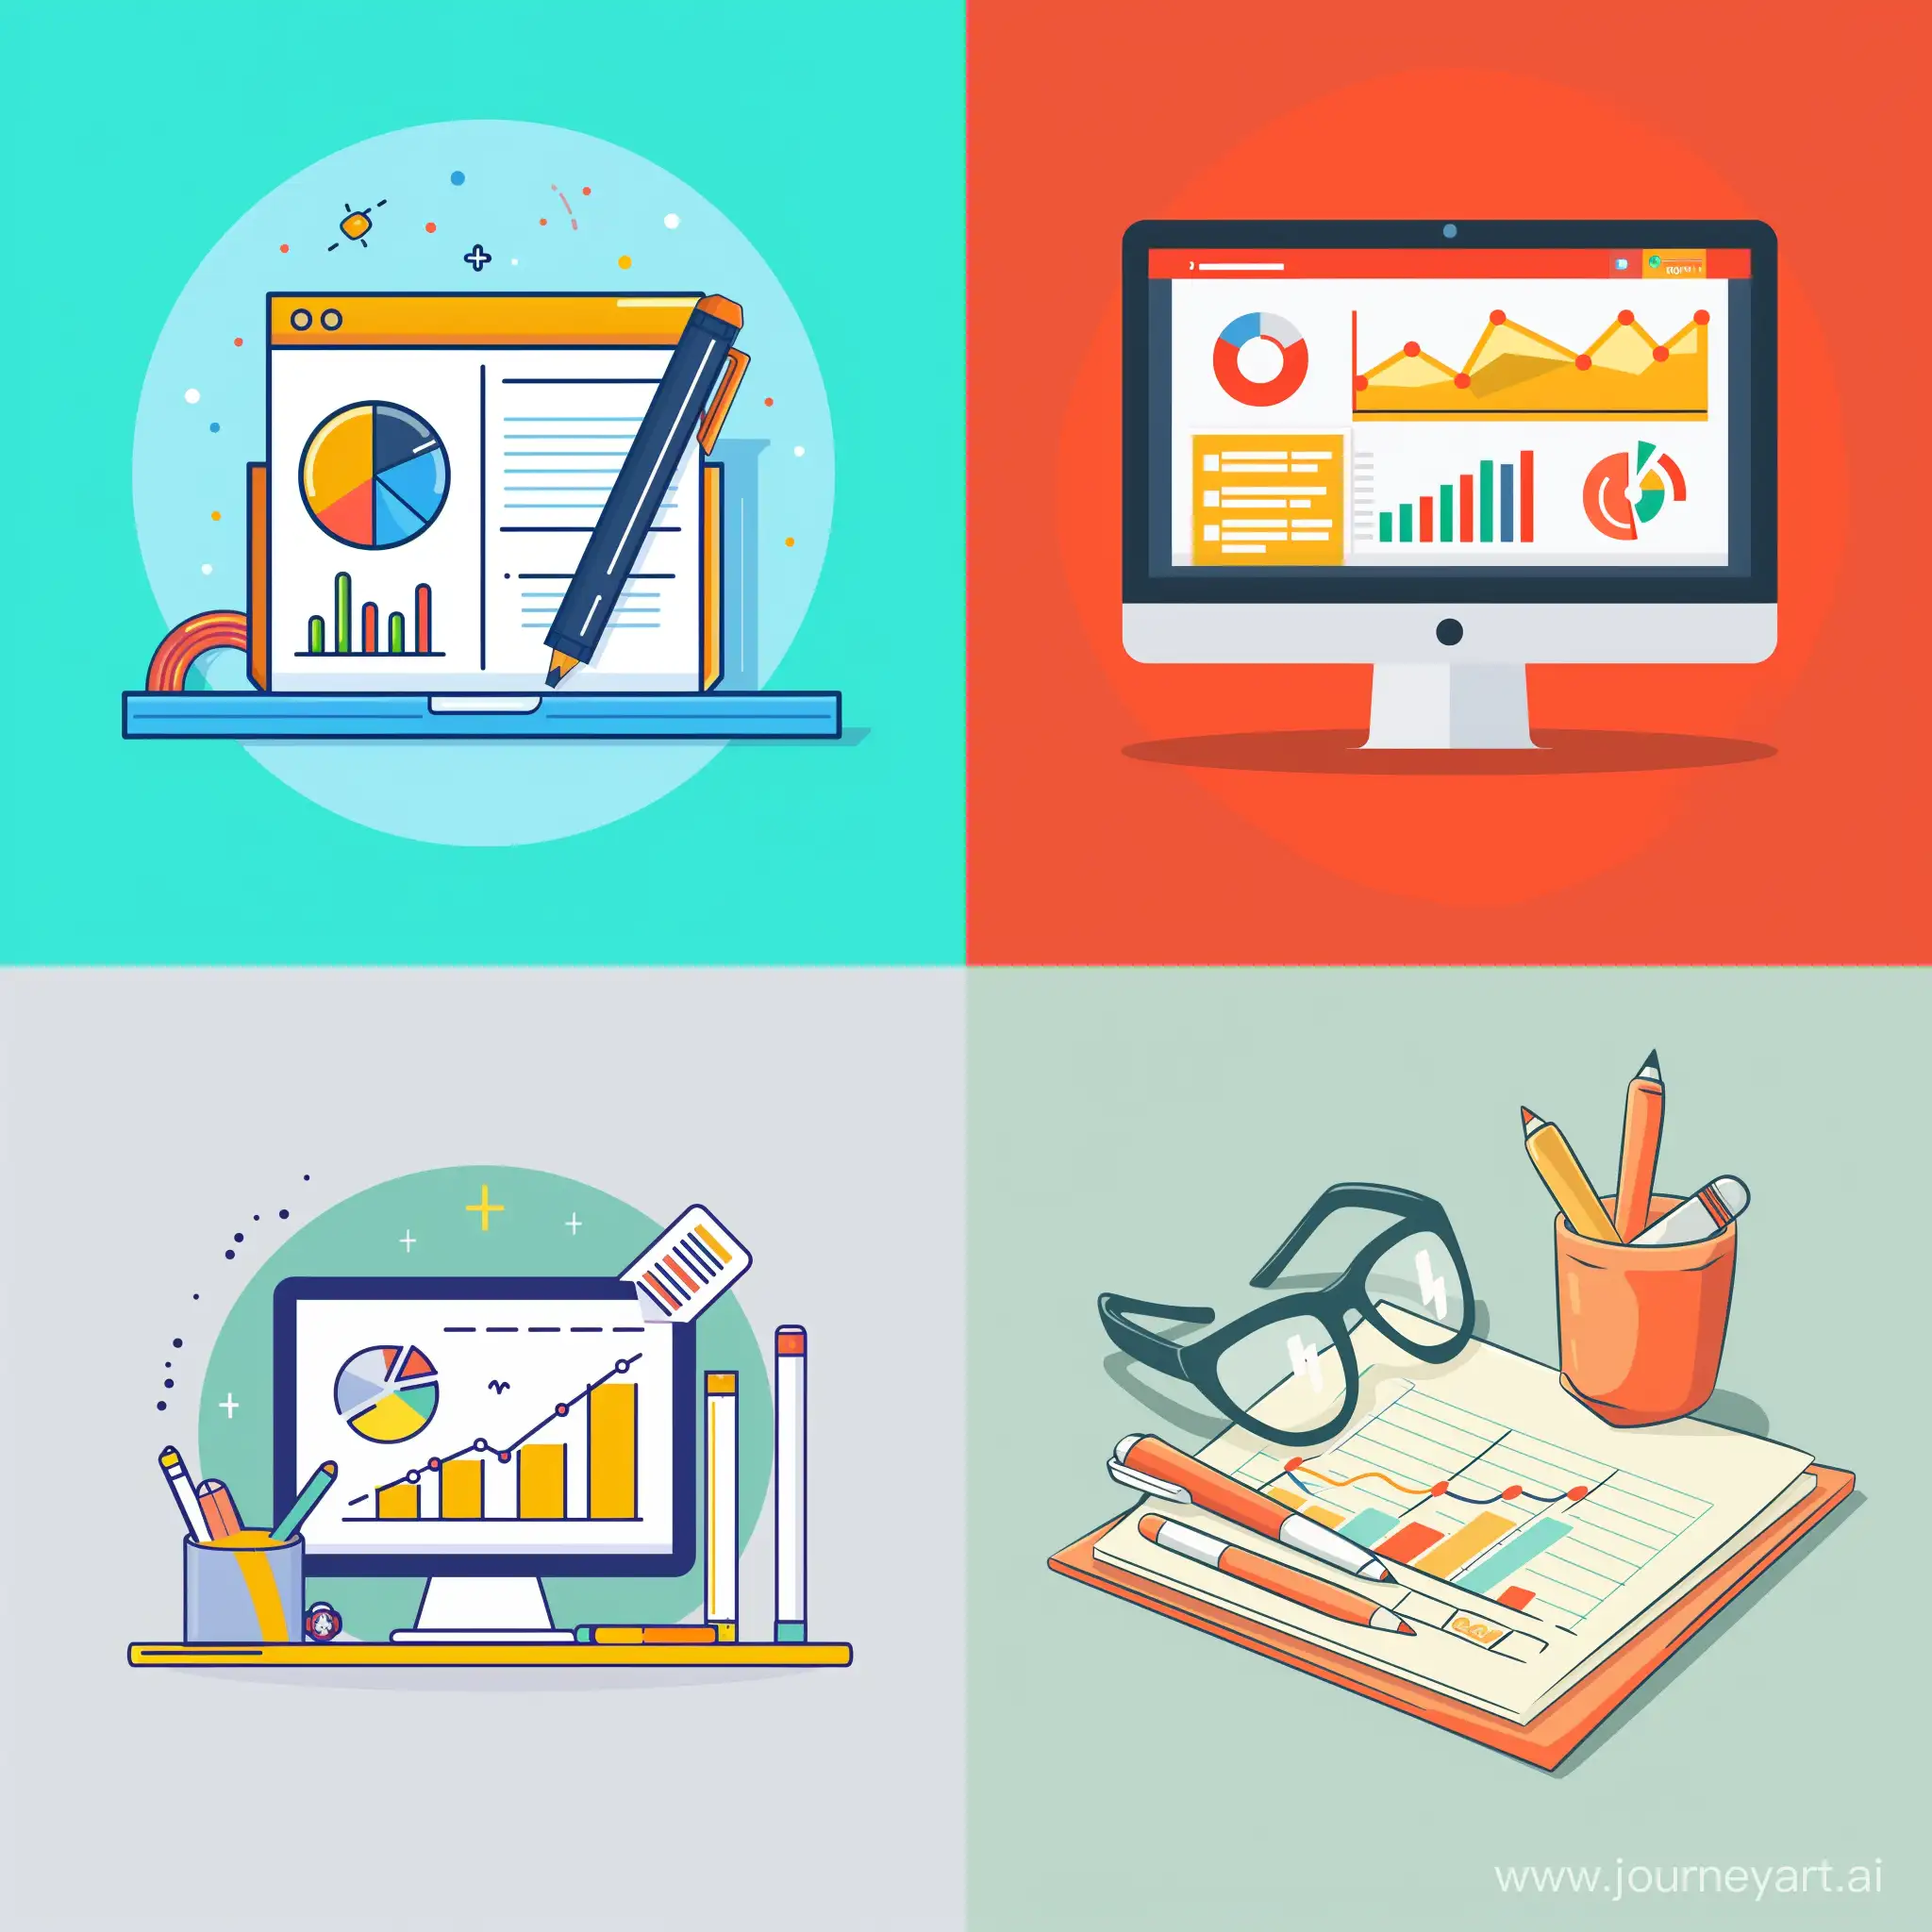 illustration a minimal graphic image "writing weblog content about Add users to Analytics" with plain color background
A photo for an internet blog article
A photo to attract users
It is about the Google Analytics tool
Show how to add a new user to Google Analytics